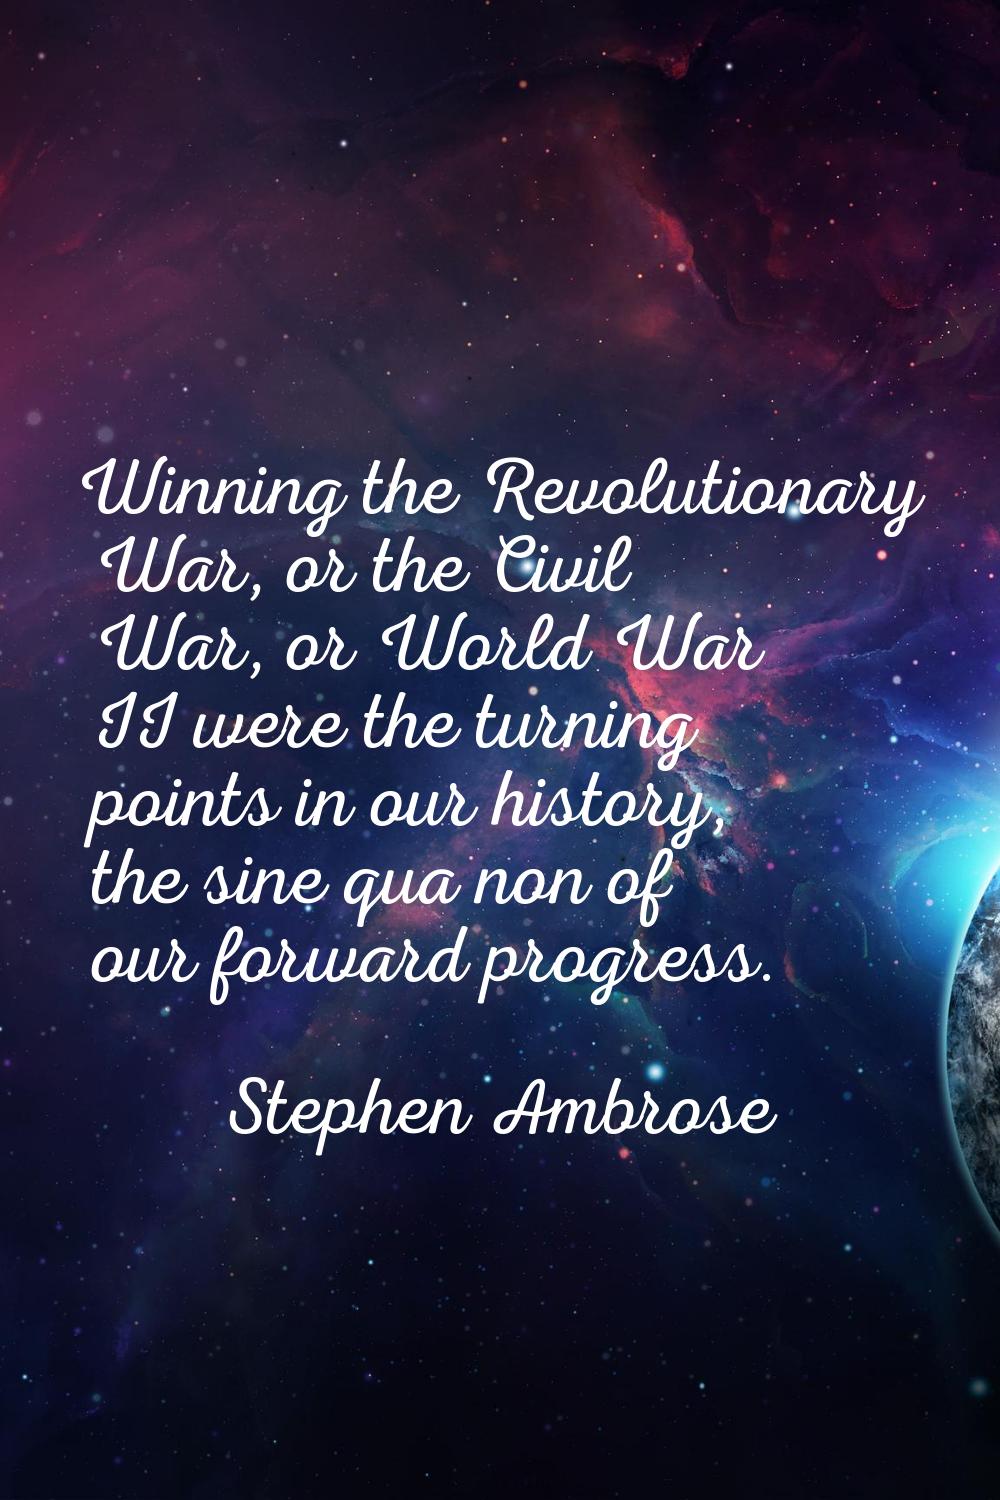 Winning the Revolutionary War, or the Civil War, or World War II were the turning points in our his